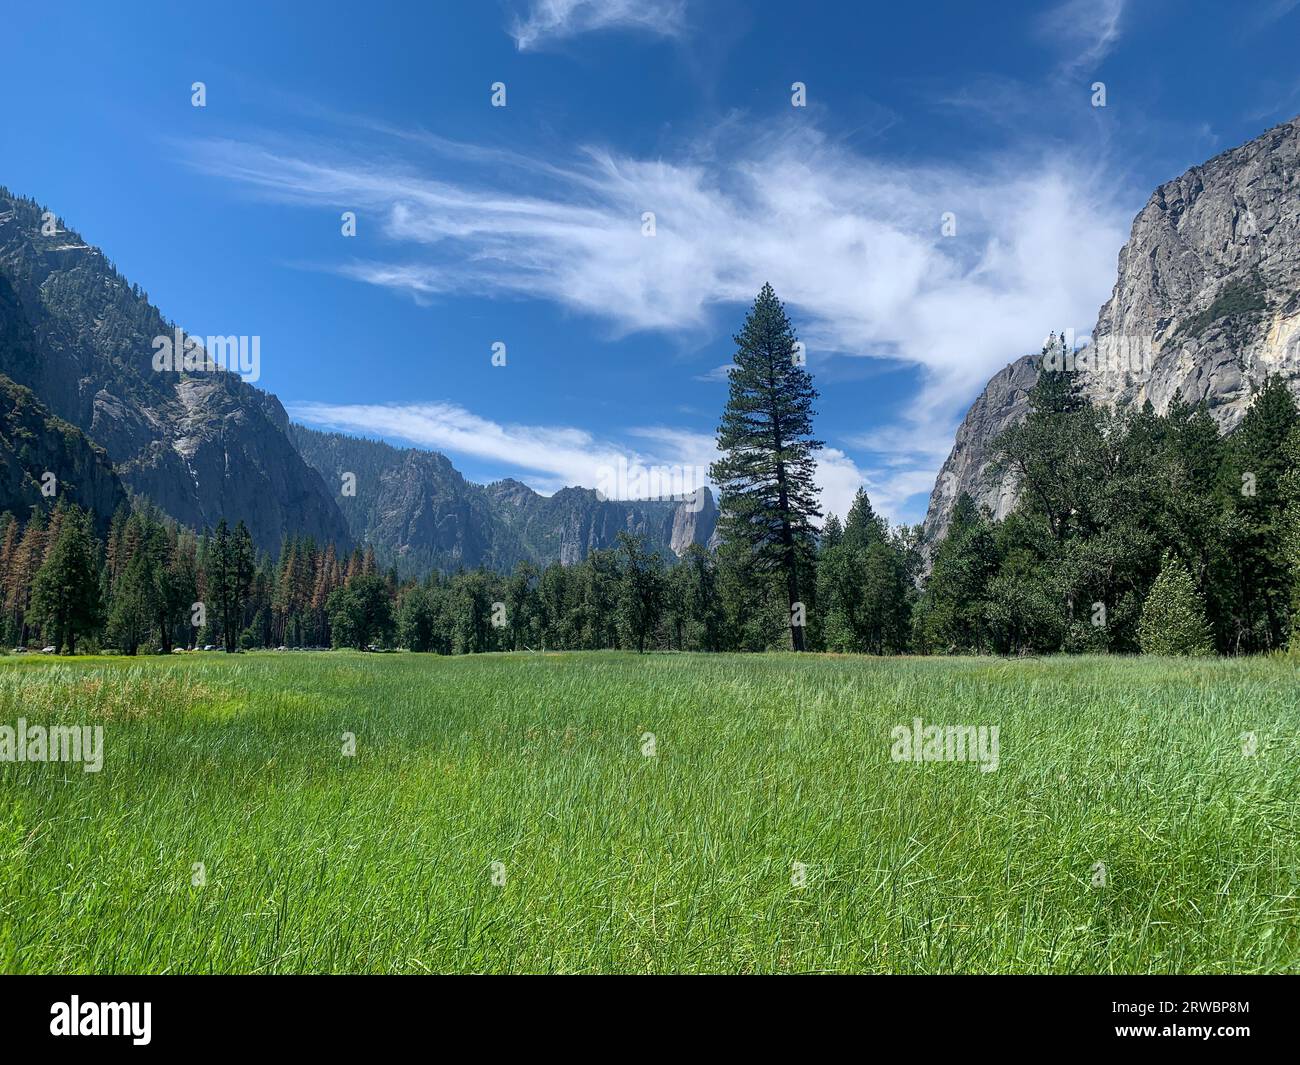 Yosemite Valley - Untouched meadow surrounded by coniferous trees, mountains, and serene skies. Stock Photo